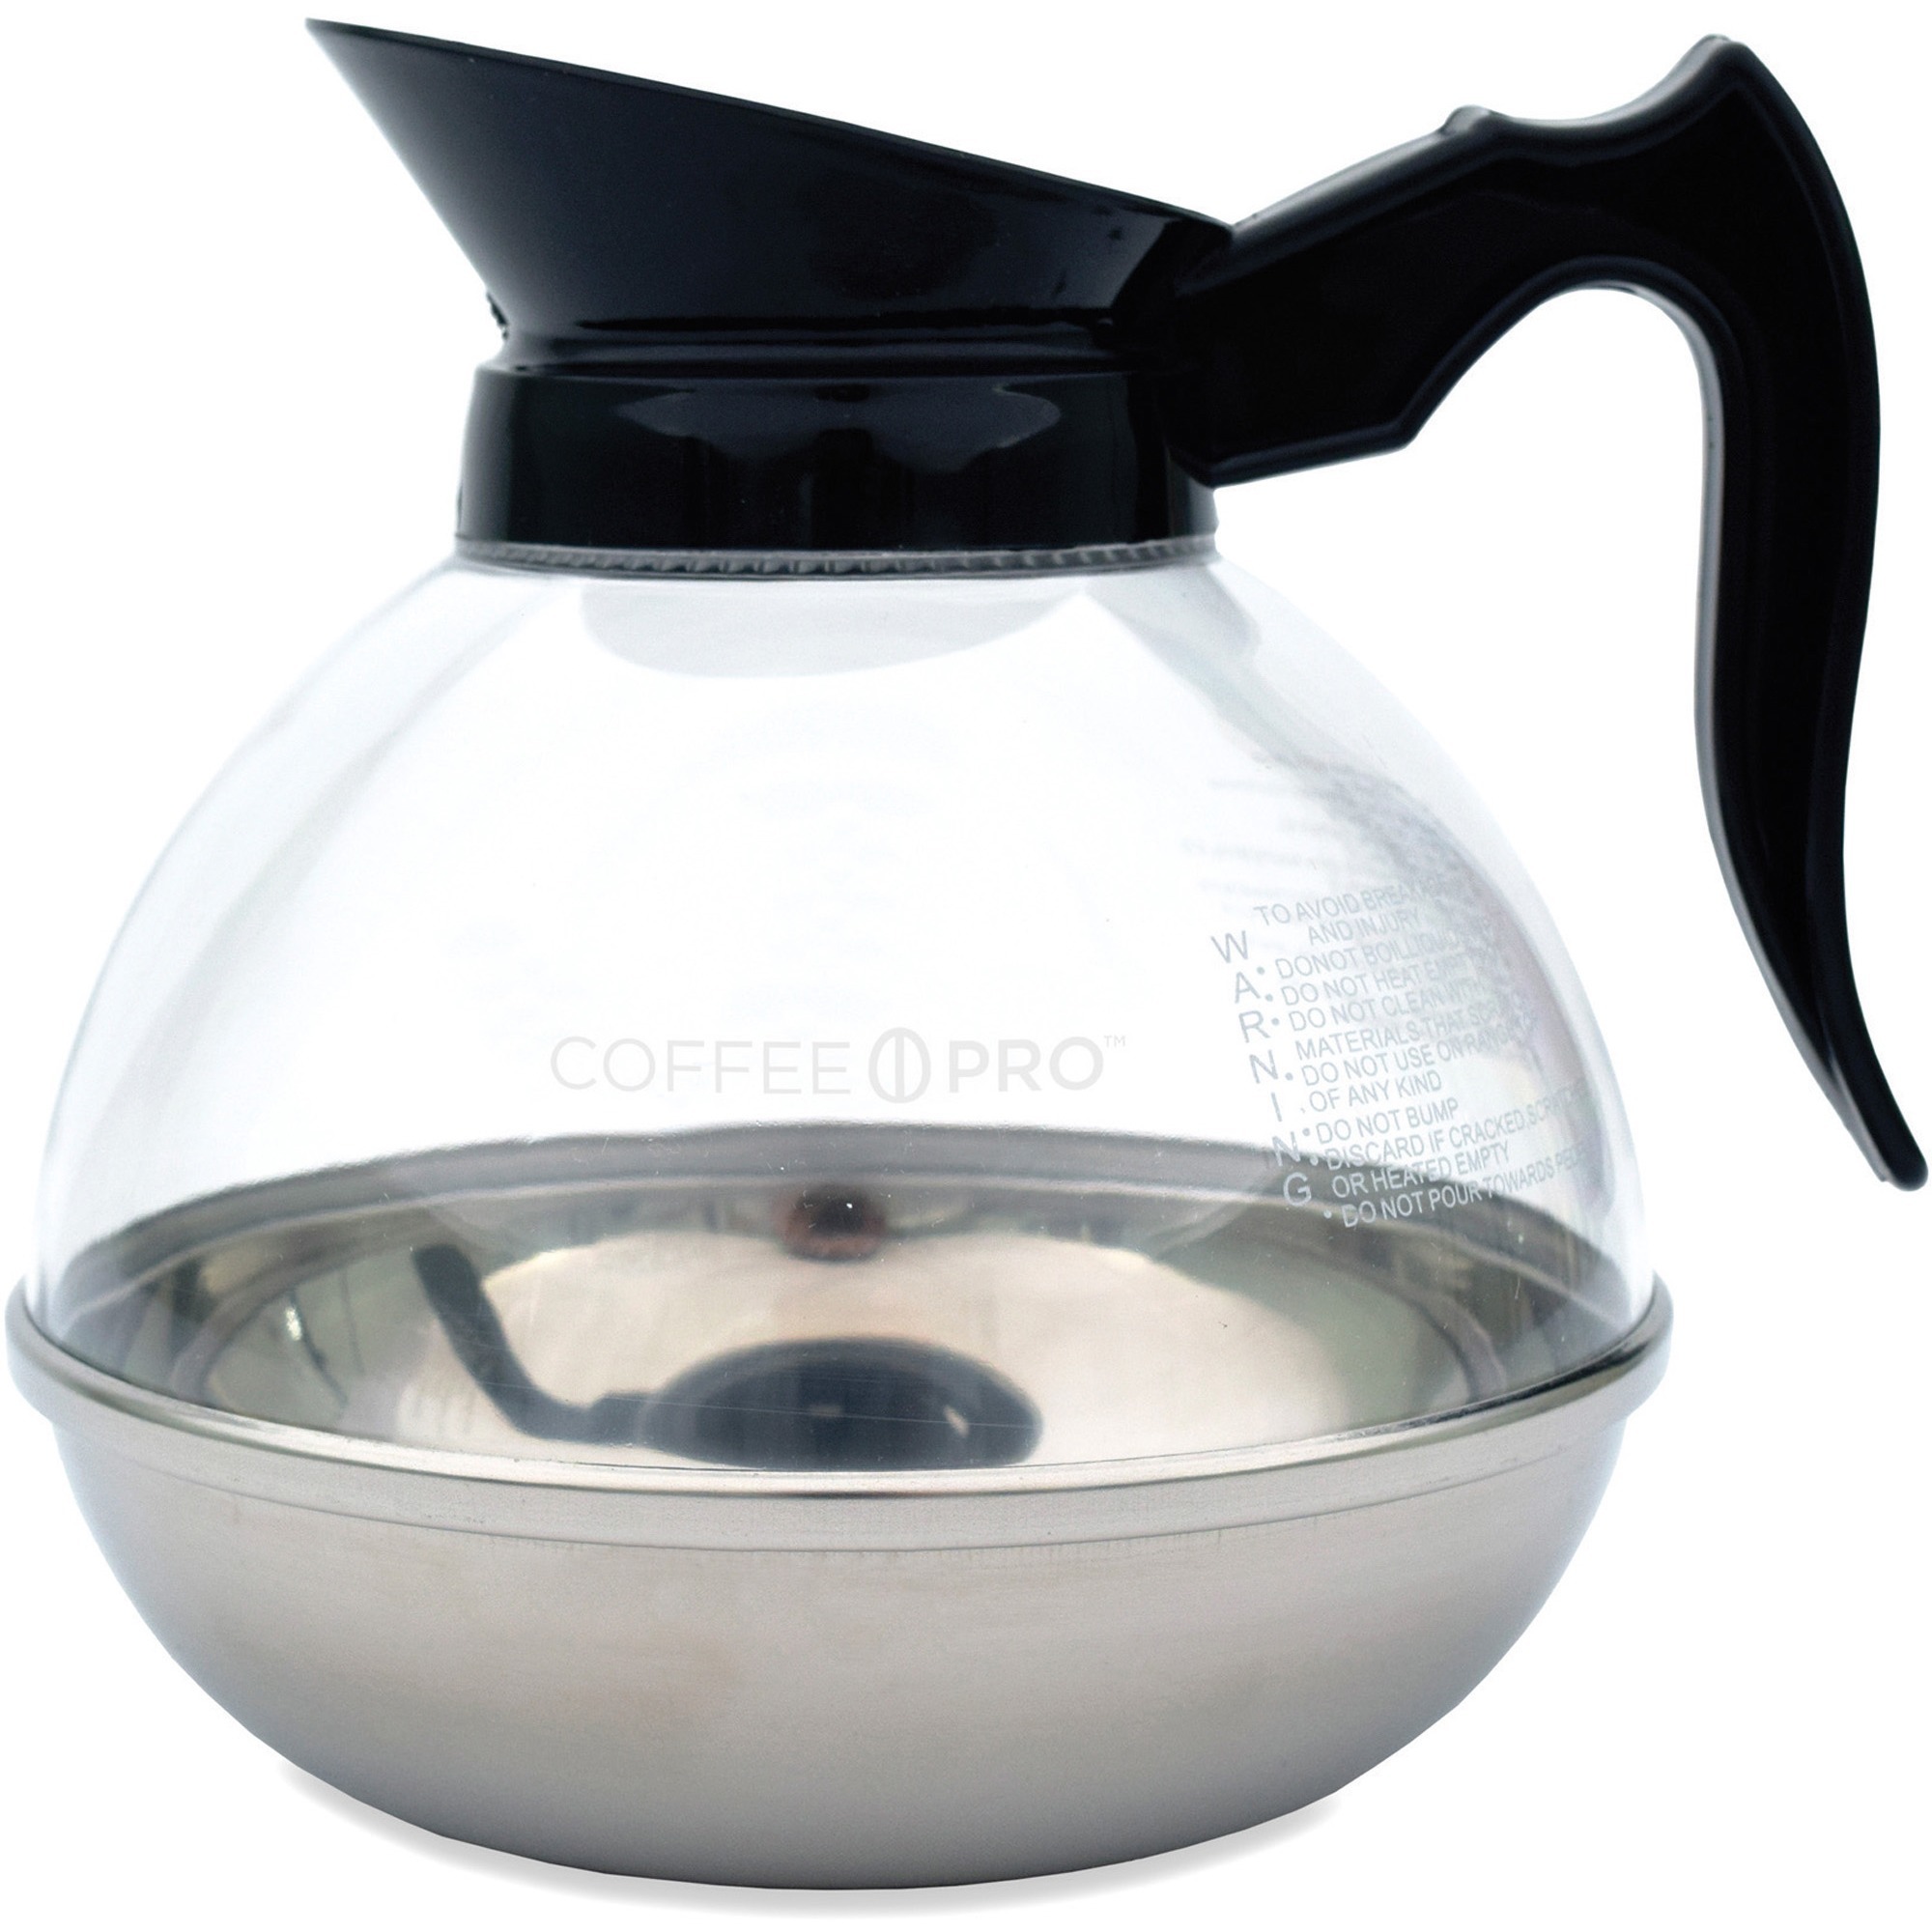 Coffee Pro Unbreakable 12-cup Decanter - Polycarbonate, Stainless Steel, Phenolic Plastic Body - 1 Each